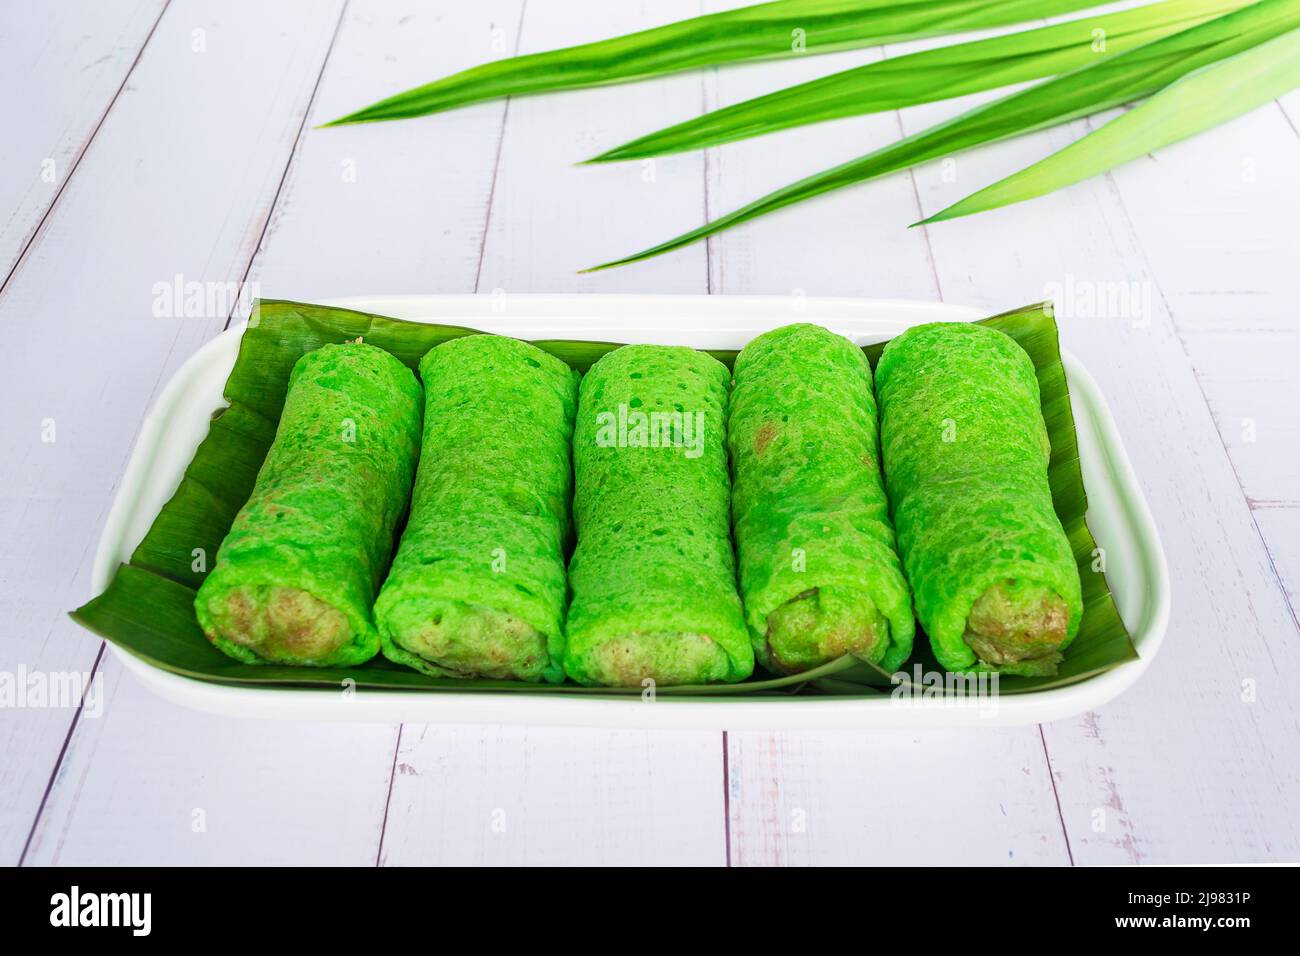 Malaysia popular assorted sweet dessert with coconut known as kuih ketayap. Stock Photo